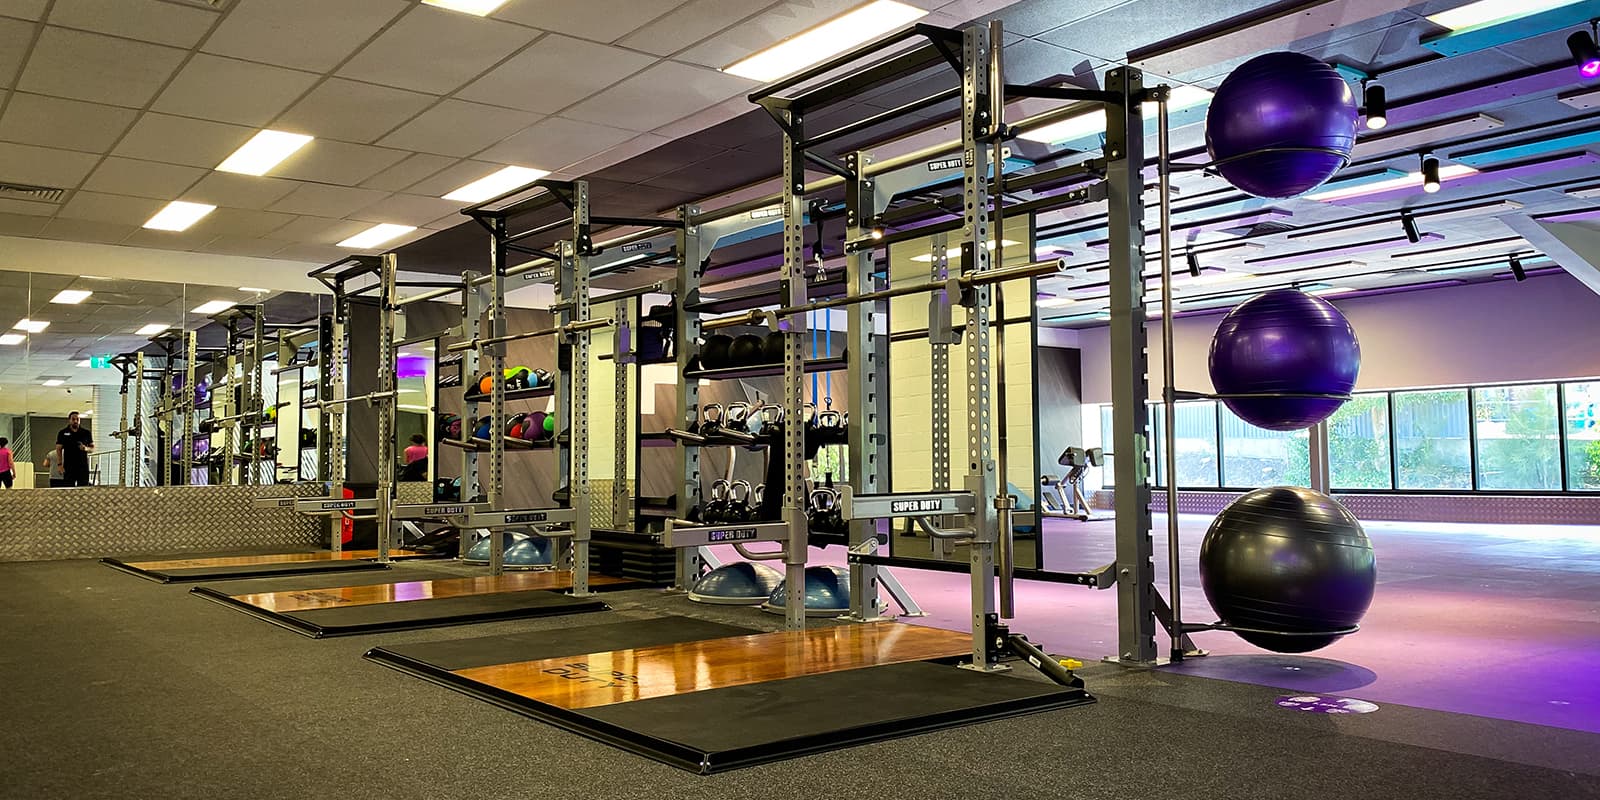 6 Day Anytime Fitness Staffed Hours Near Me for push your ABS